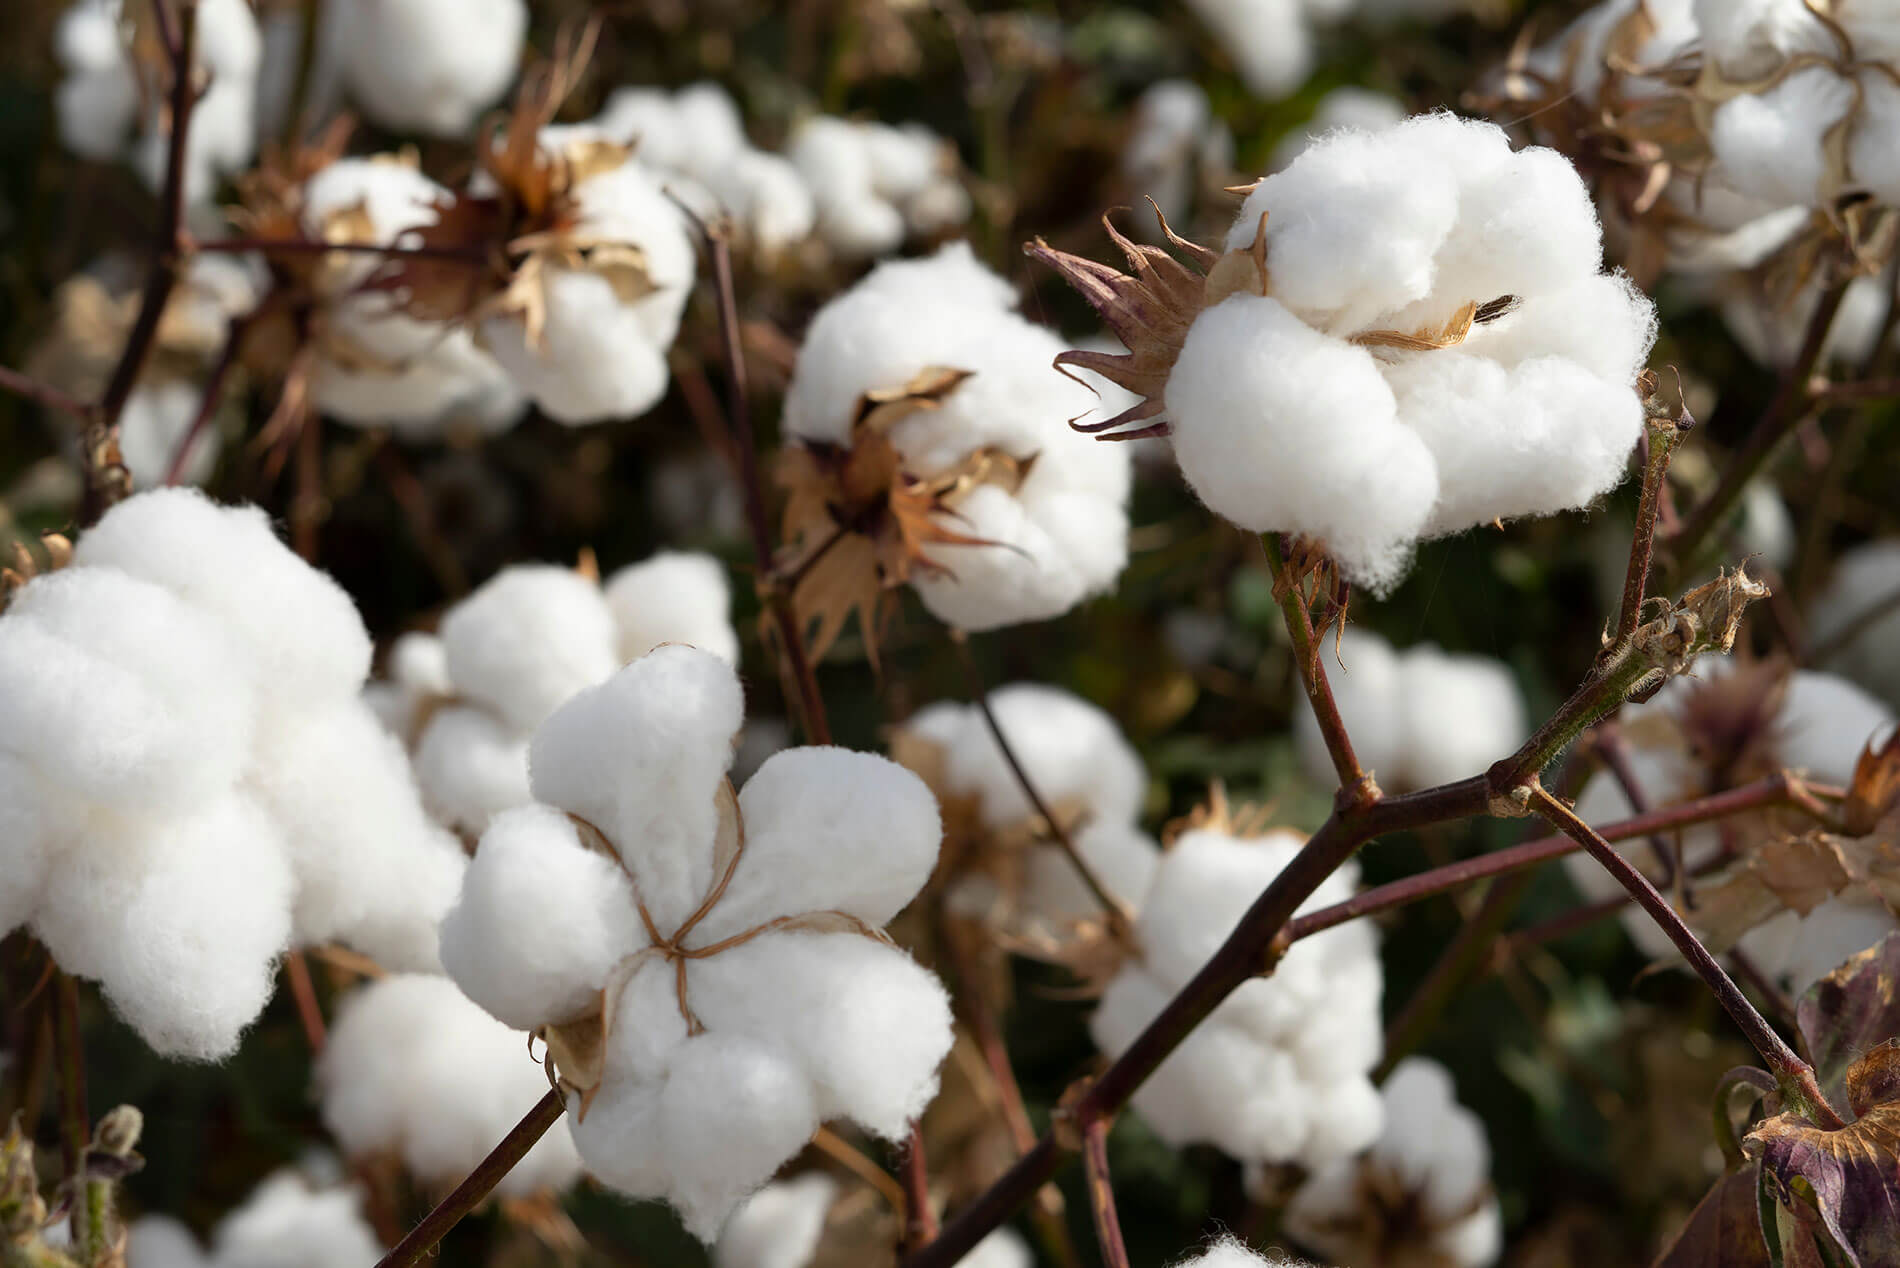 6 Facts About the Cotton Gin